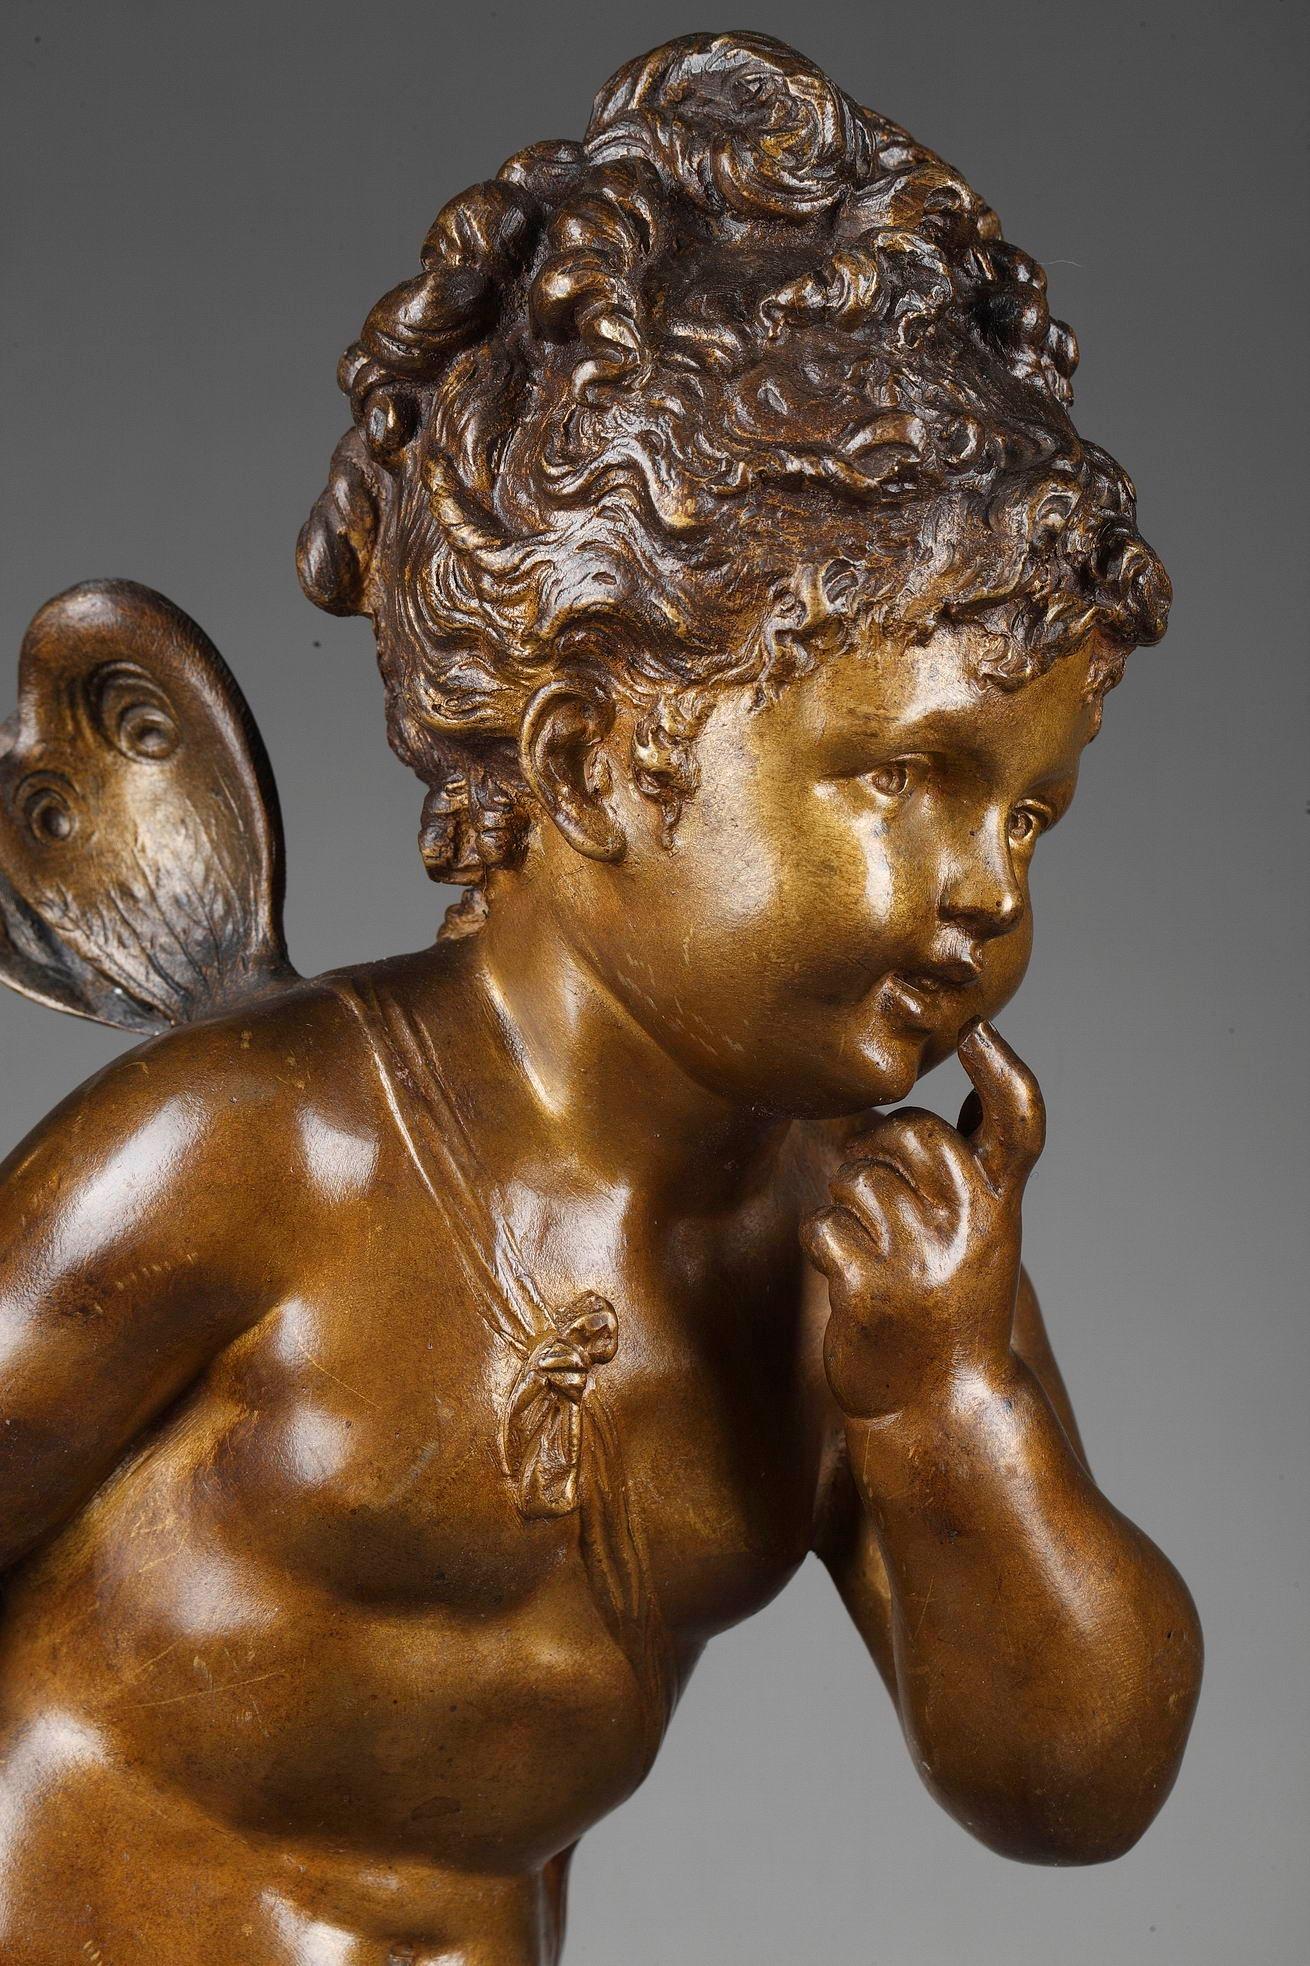 This brown and gold patinated bronze figure was crafted by the French sculptor Paul Duboy. It features a little girl, psyche, standing on a naturalistic base. The bronze sculpture is set upon a round marble plinth. Signed: Paul Duboy. Paul Duboy